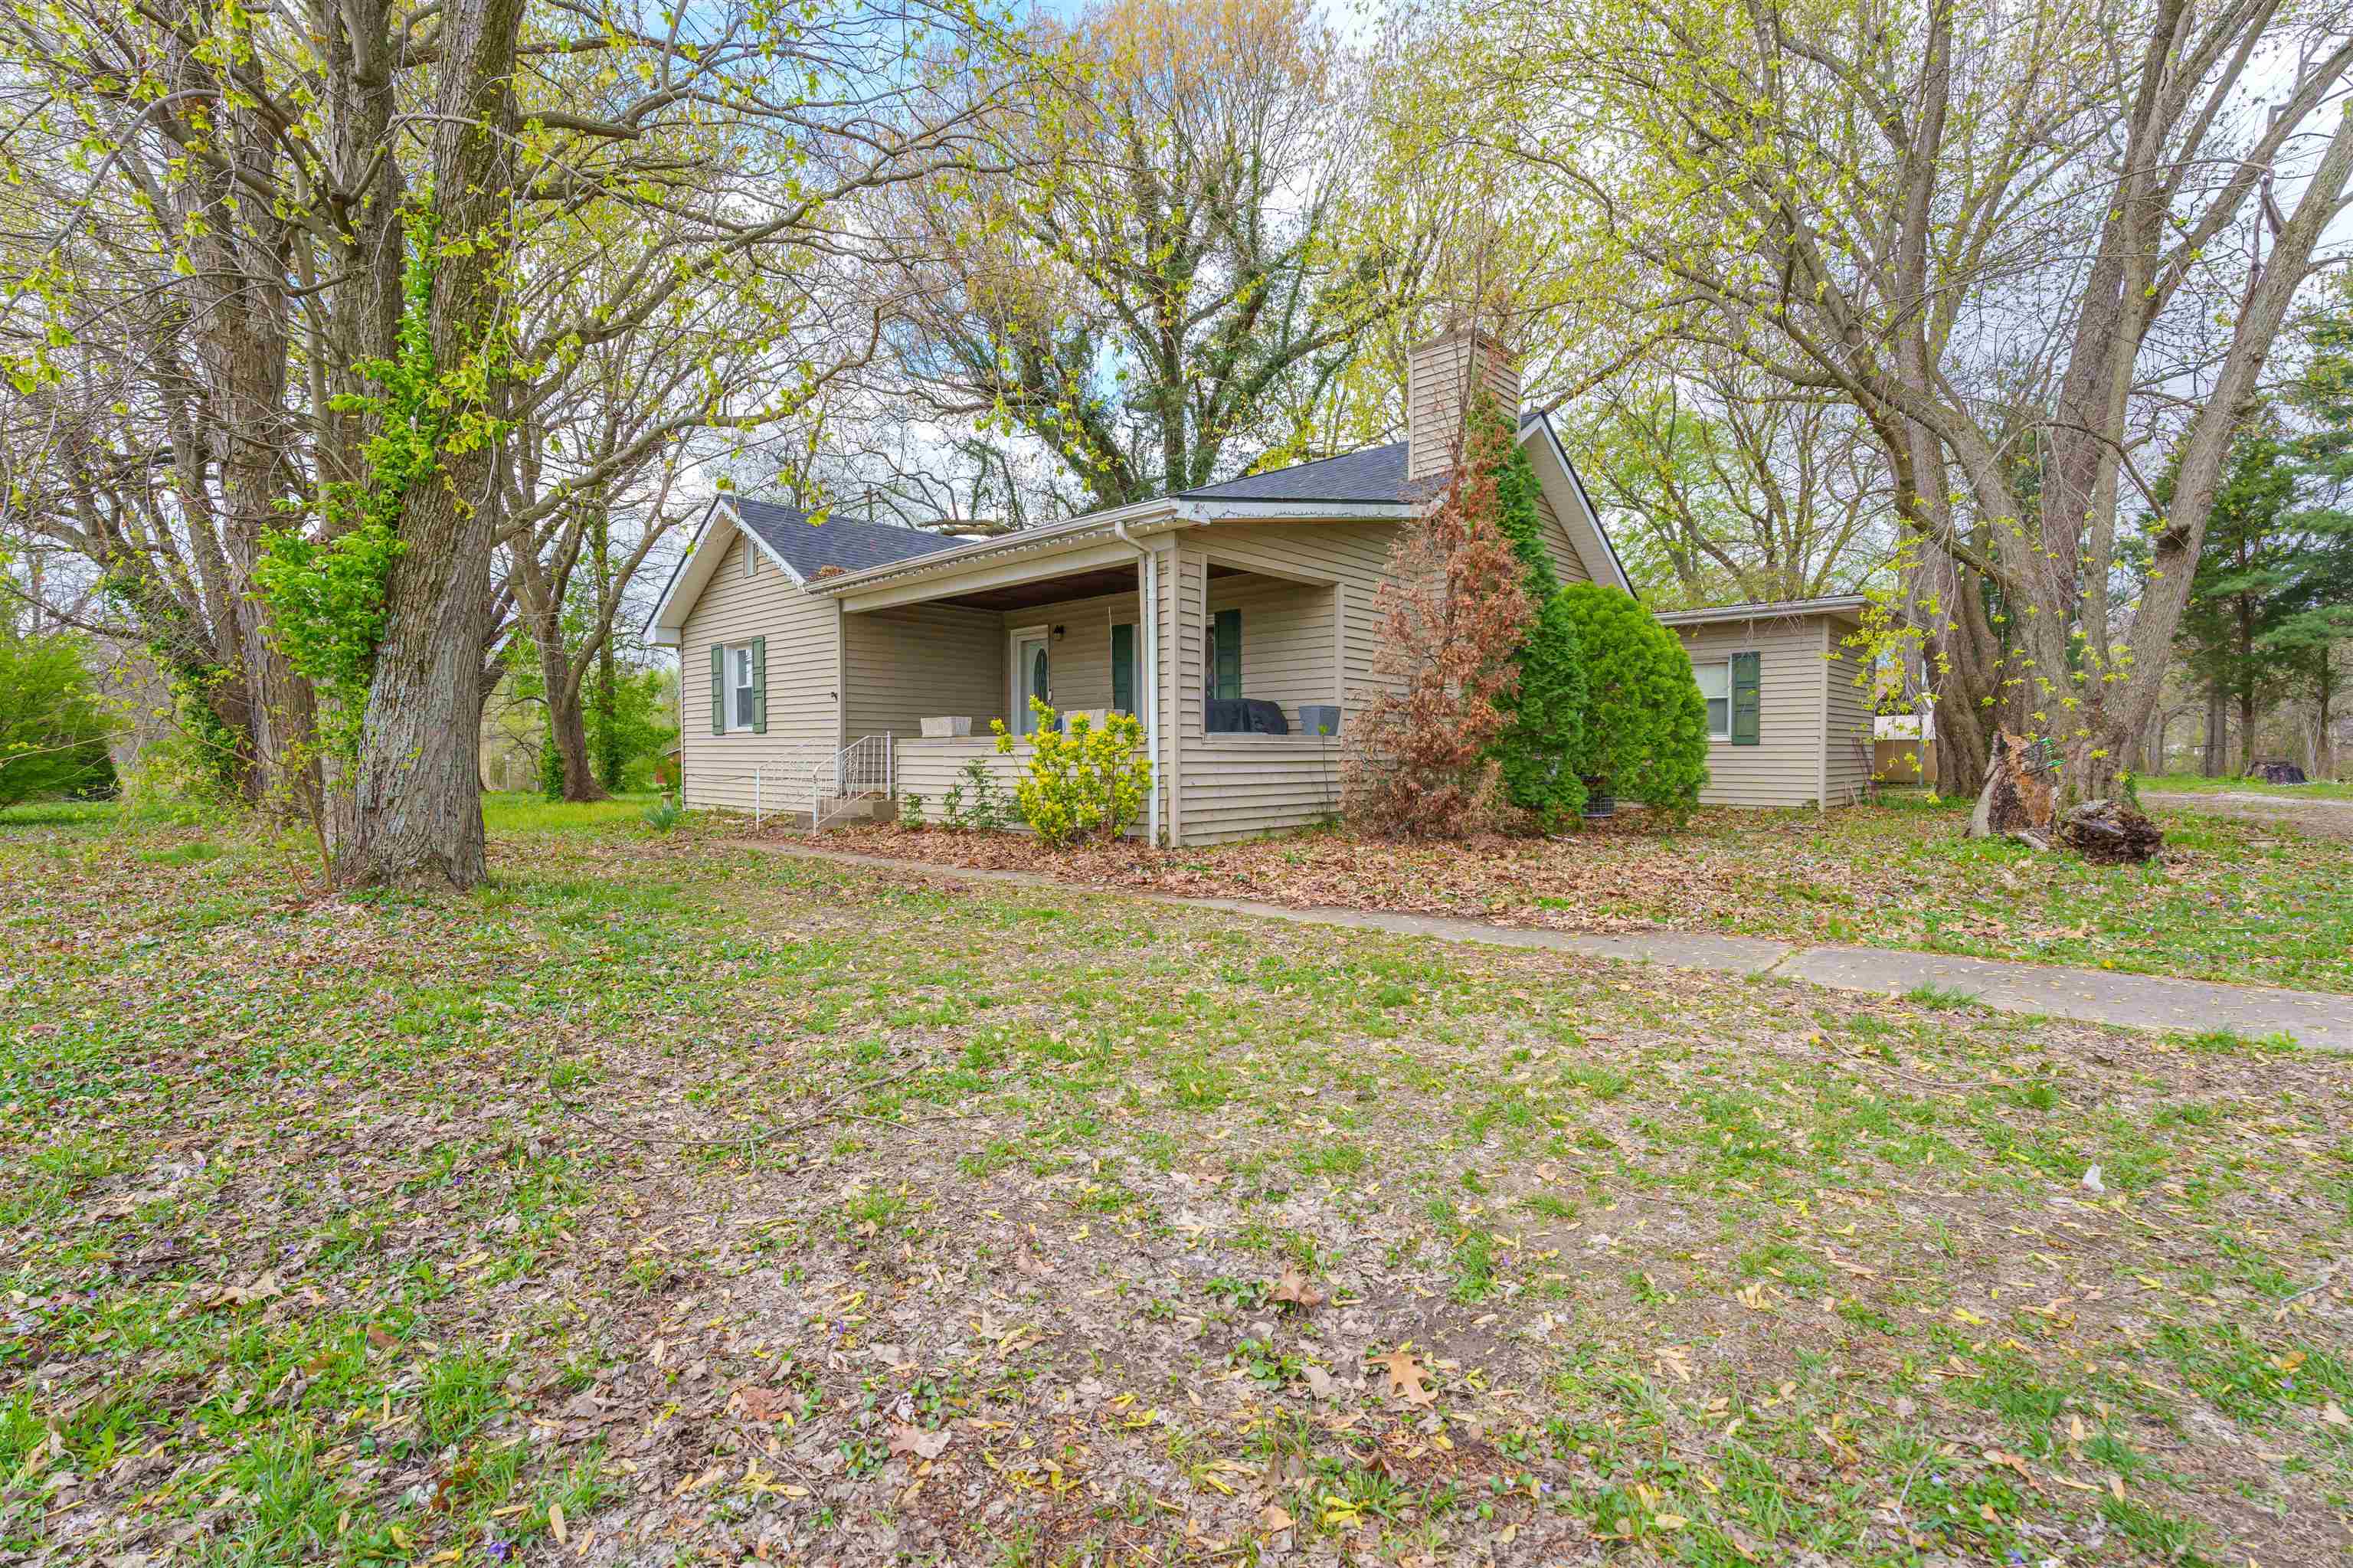 7730 HWY 81, Owensboro, Kentucky 42301, 3 Bedrooms Bedrooms, ,1 BathroomBathrooms,Single Family Residence,For Sale,HWY 81,89328